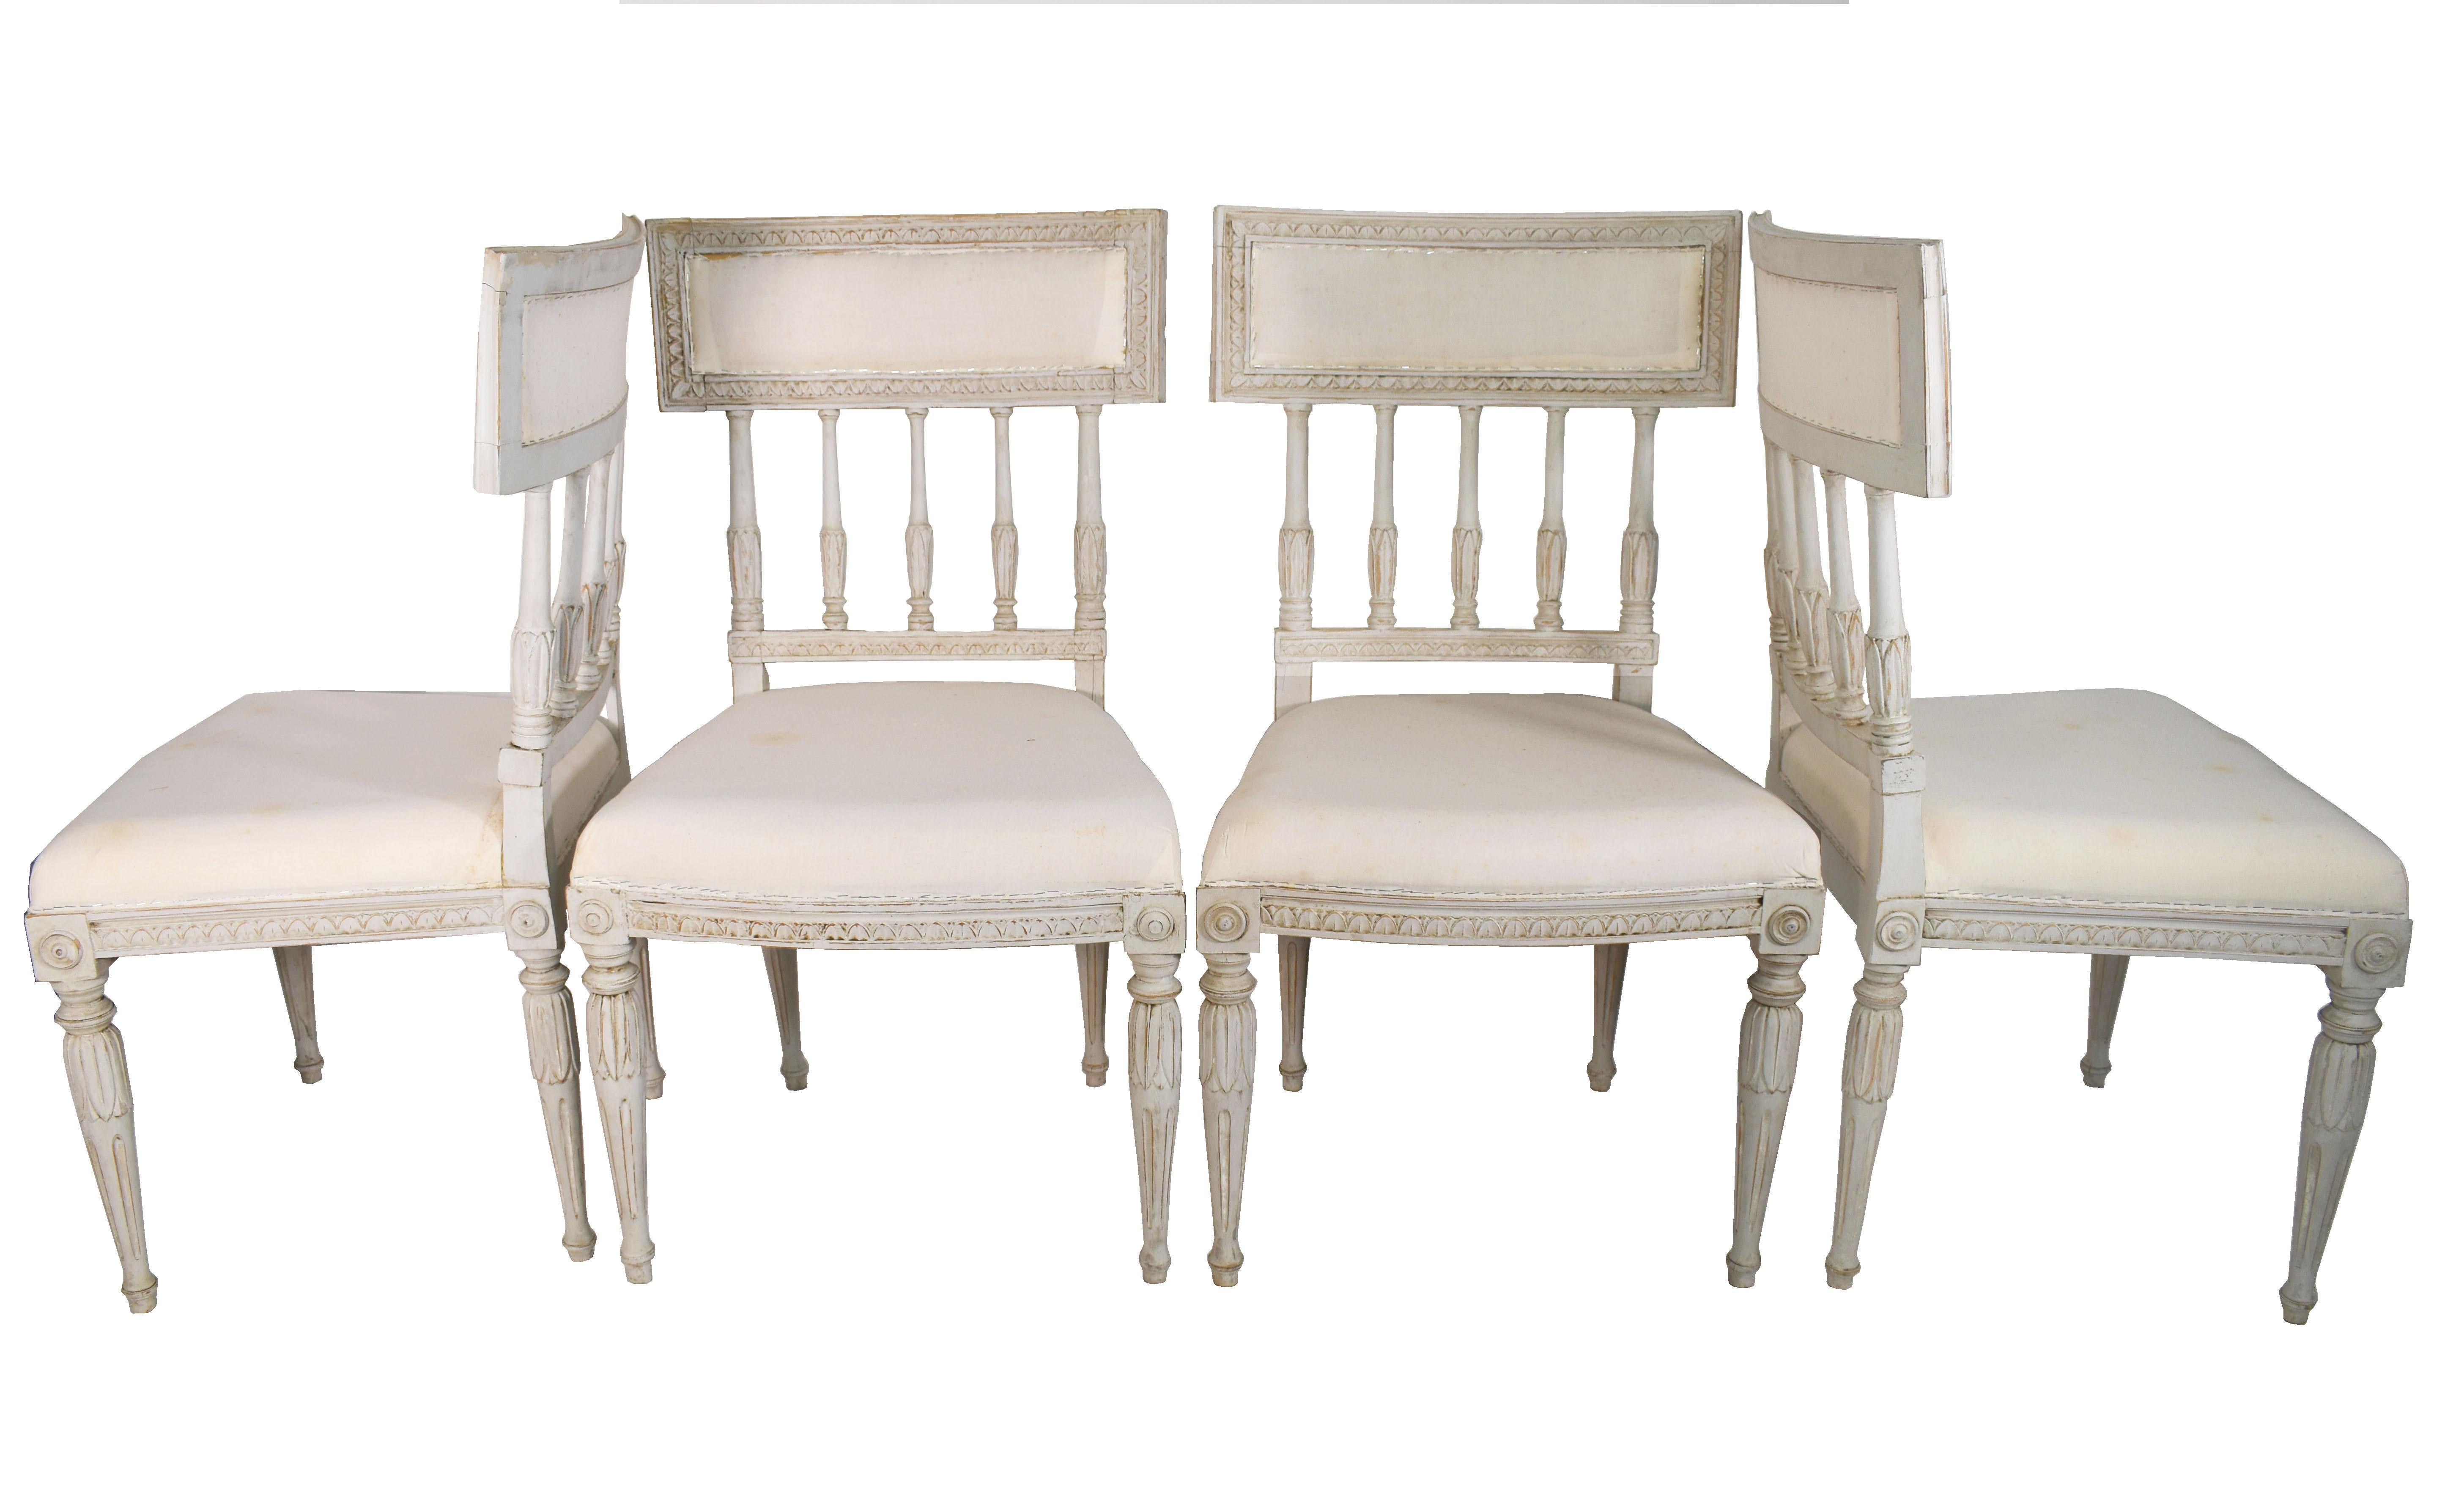 Classic set of four (4) vintage dining chairs with straight lines and hand carved details on front, back, and chair legs. Wood color grayish white with muslin seat.